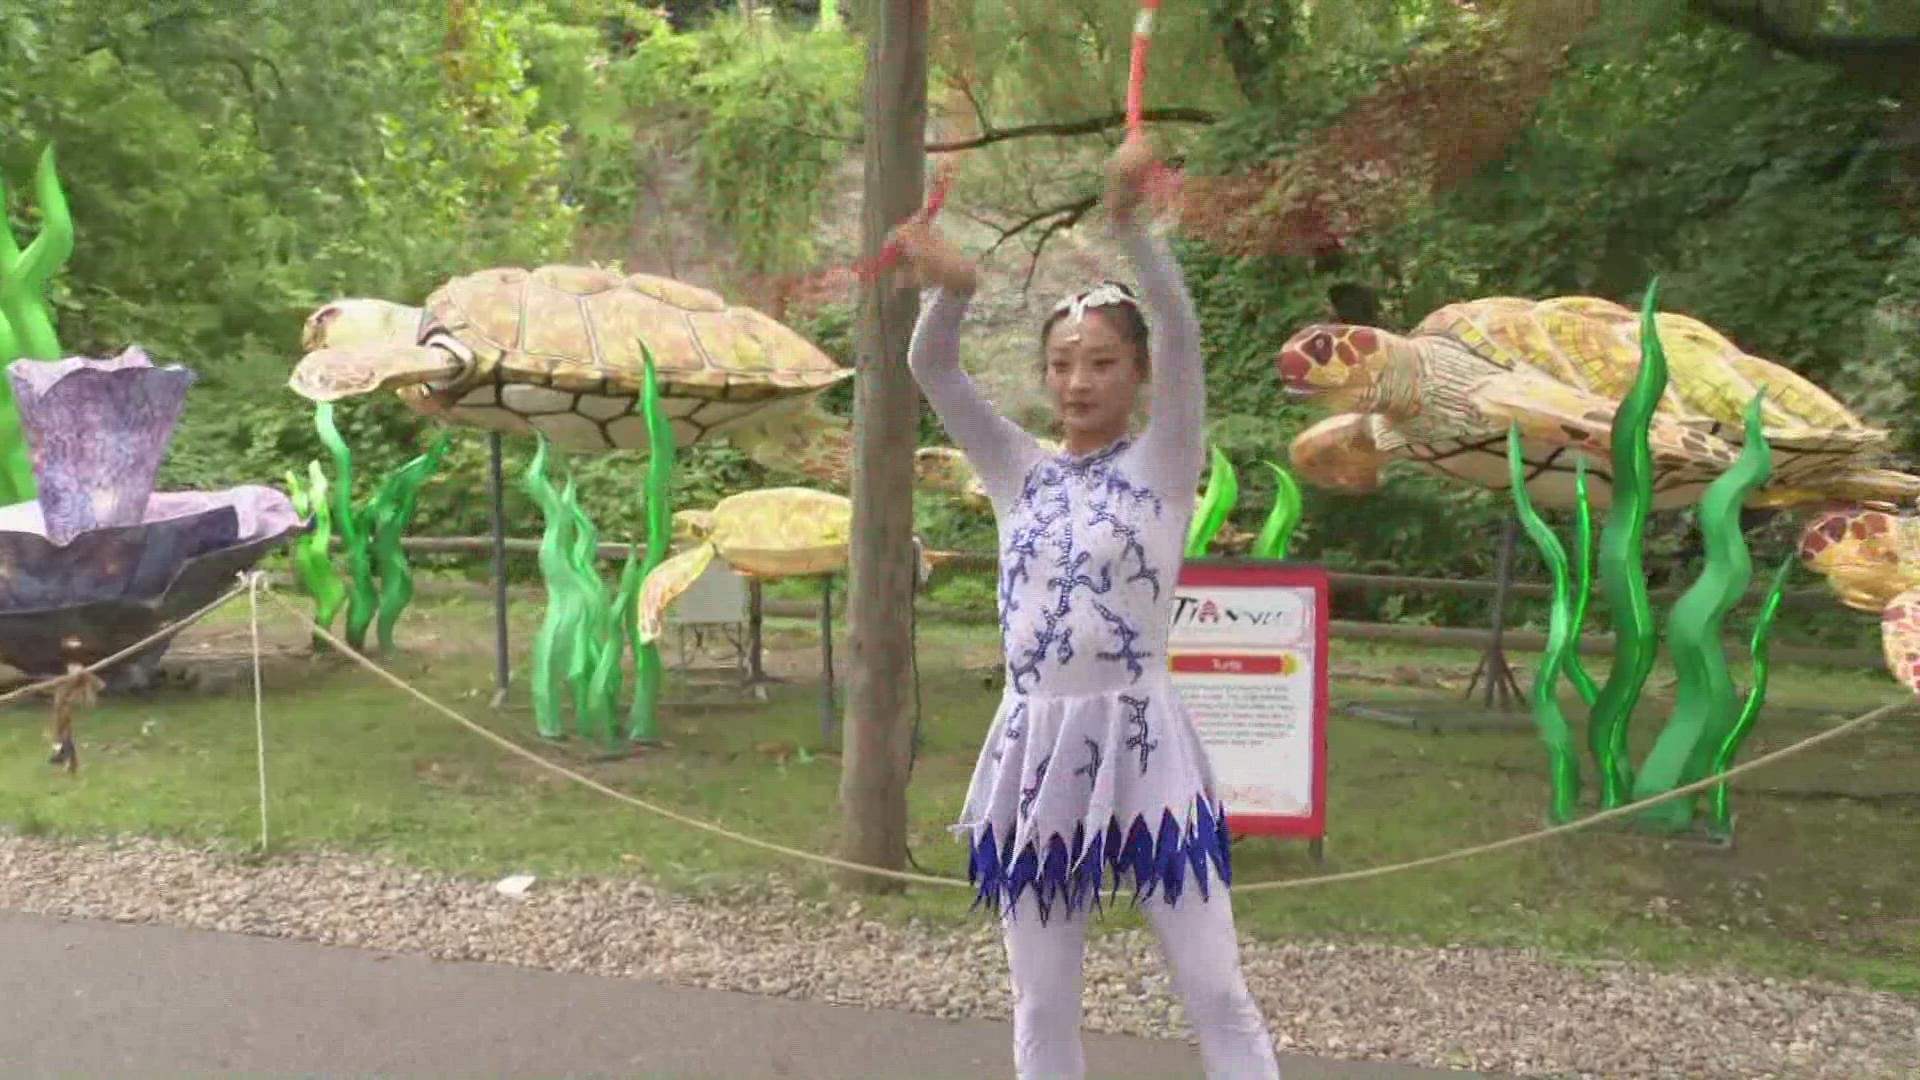 3News Digital Anchor Stephanie Haney reports live from the Cleveland Metroparks Zoo, where the Asian Lantern Festival, back for its fifth year, runs until August 21.